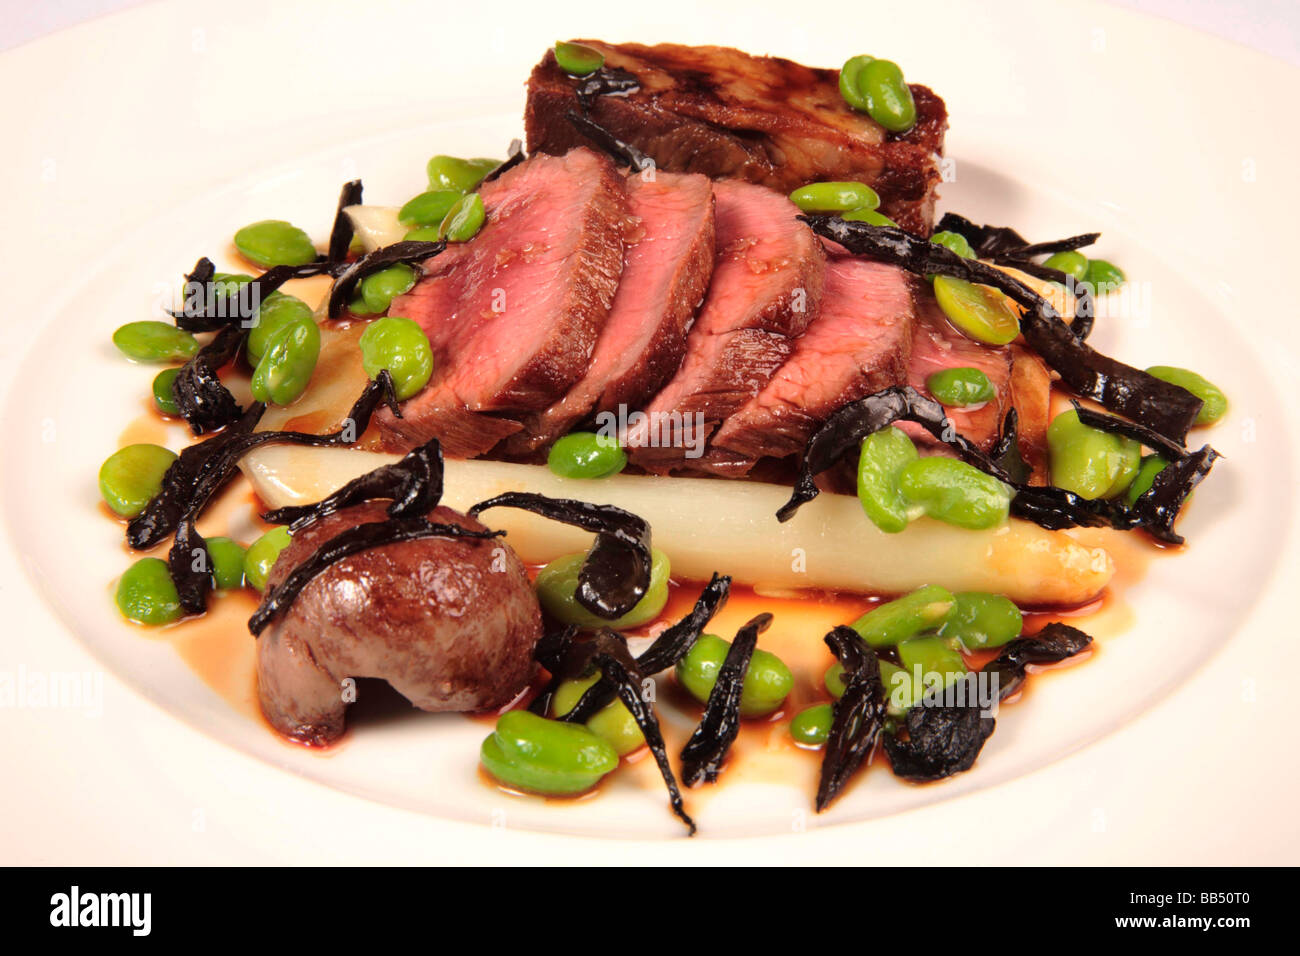 Beef main course Stock Photo